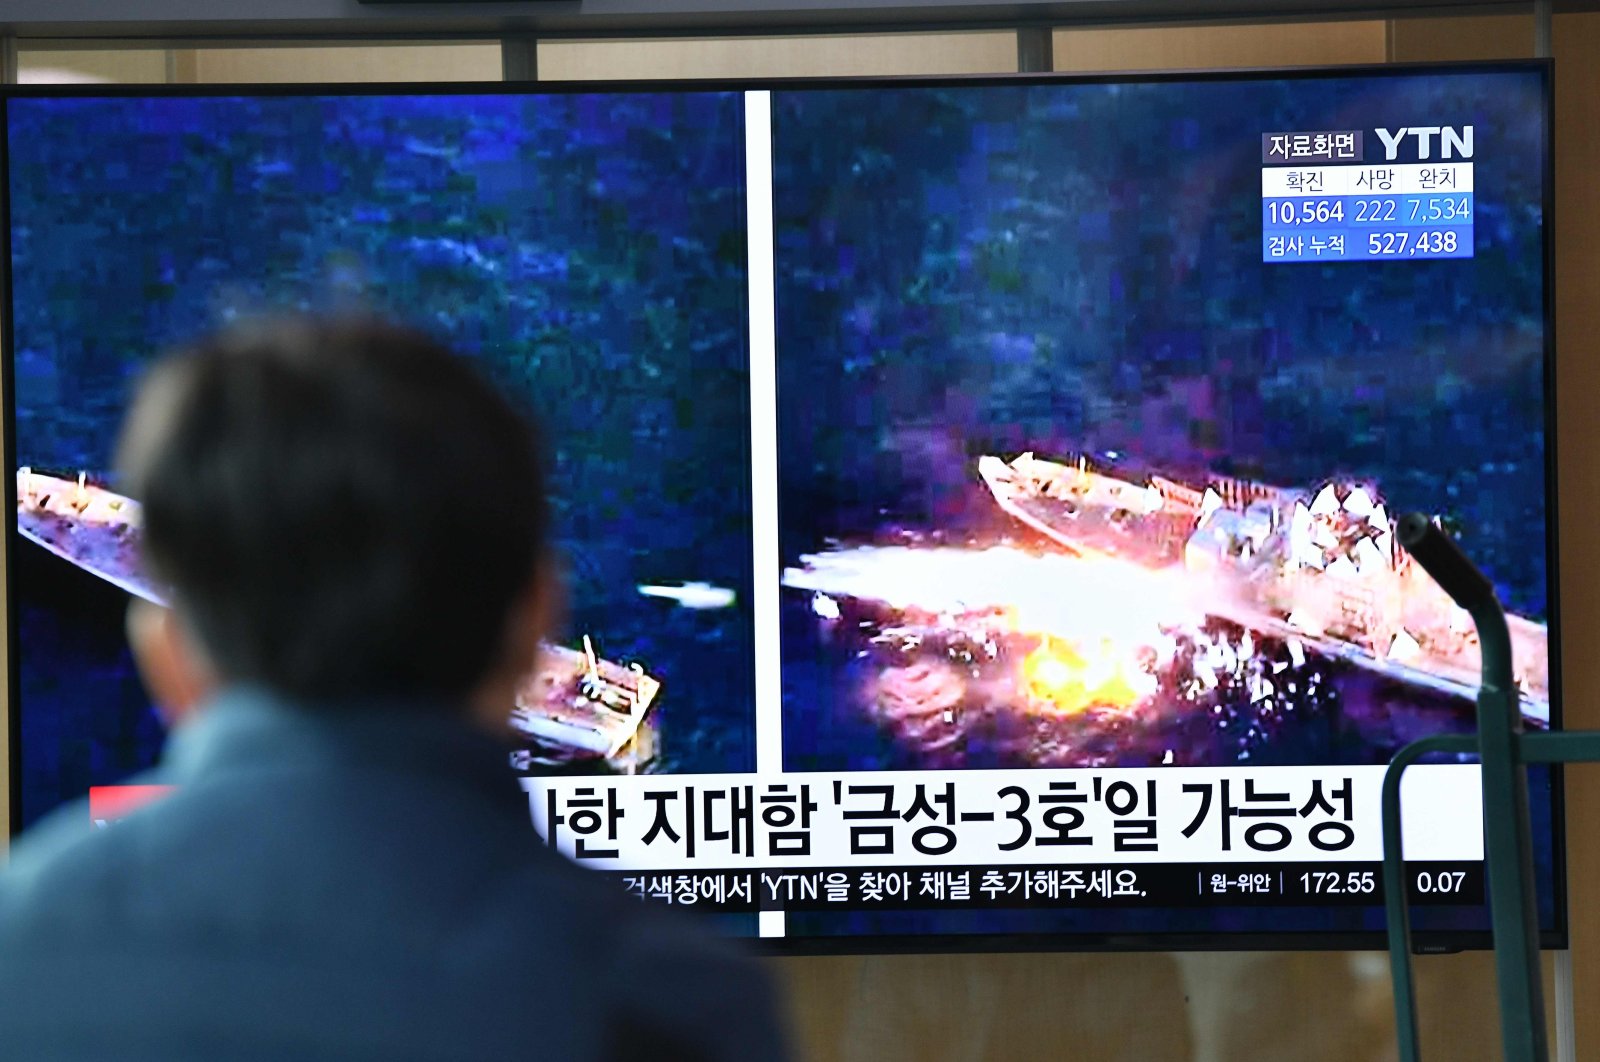 A man watches a television news broadcast showing file footage of a North Korean missile test, at a railway station in Seoul, April 14, 2020.